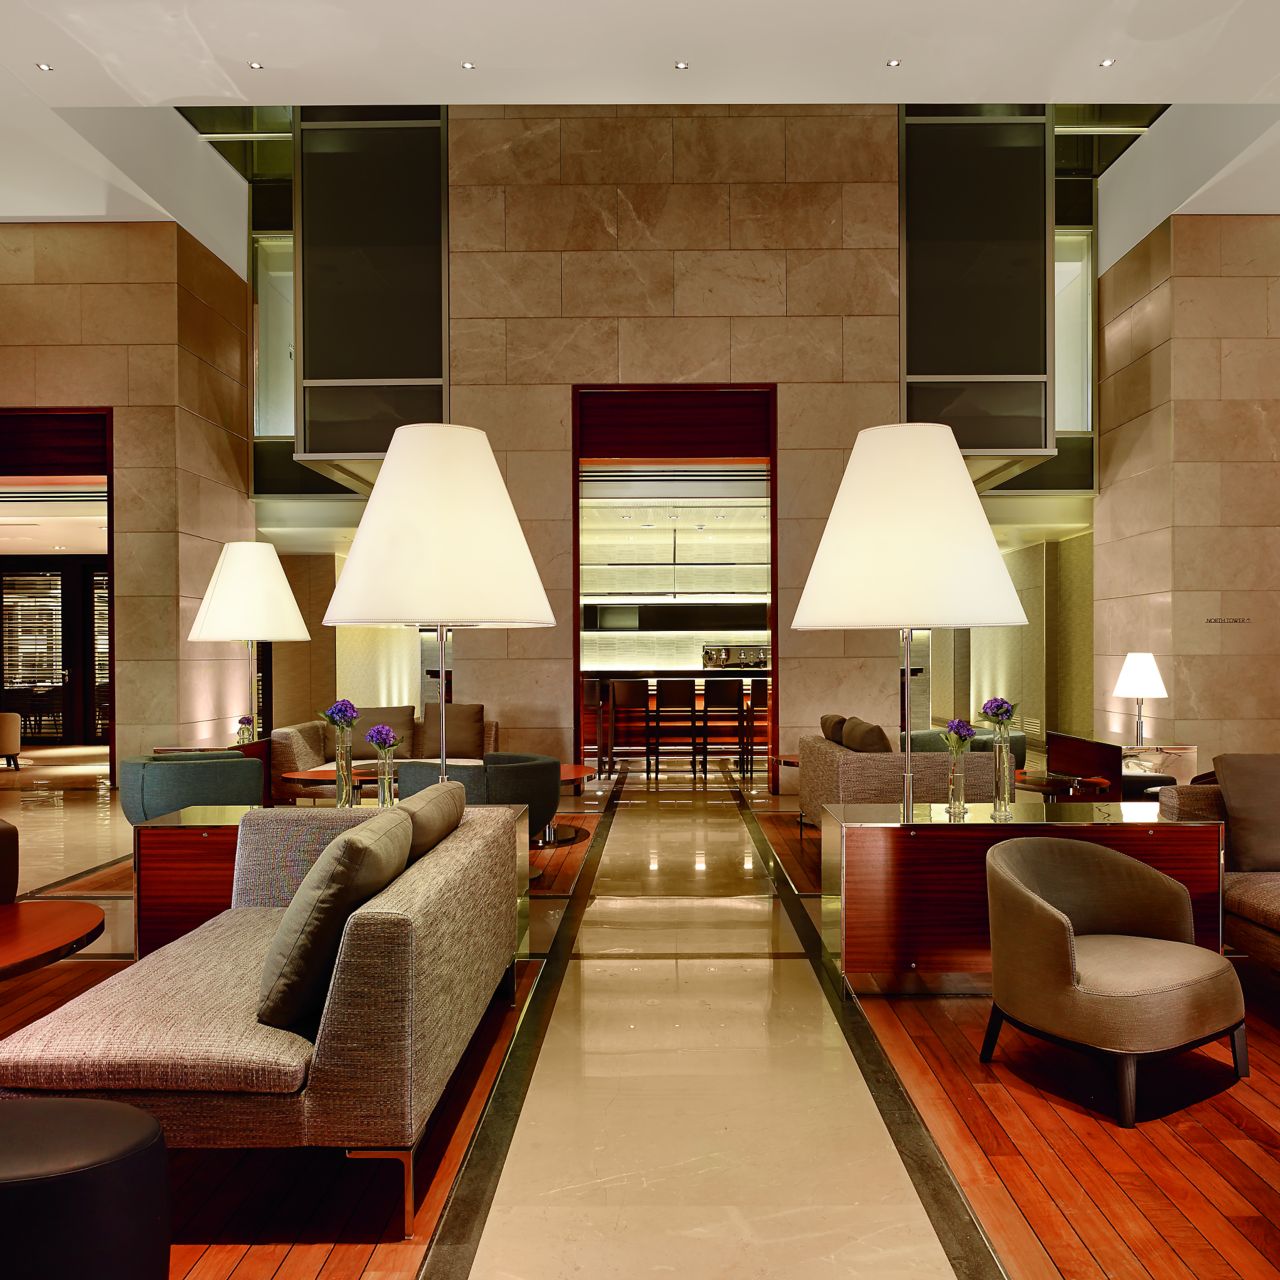 The Lobby Lounge at evening with rich woods, cool stone and intimate seating